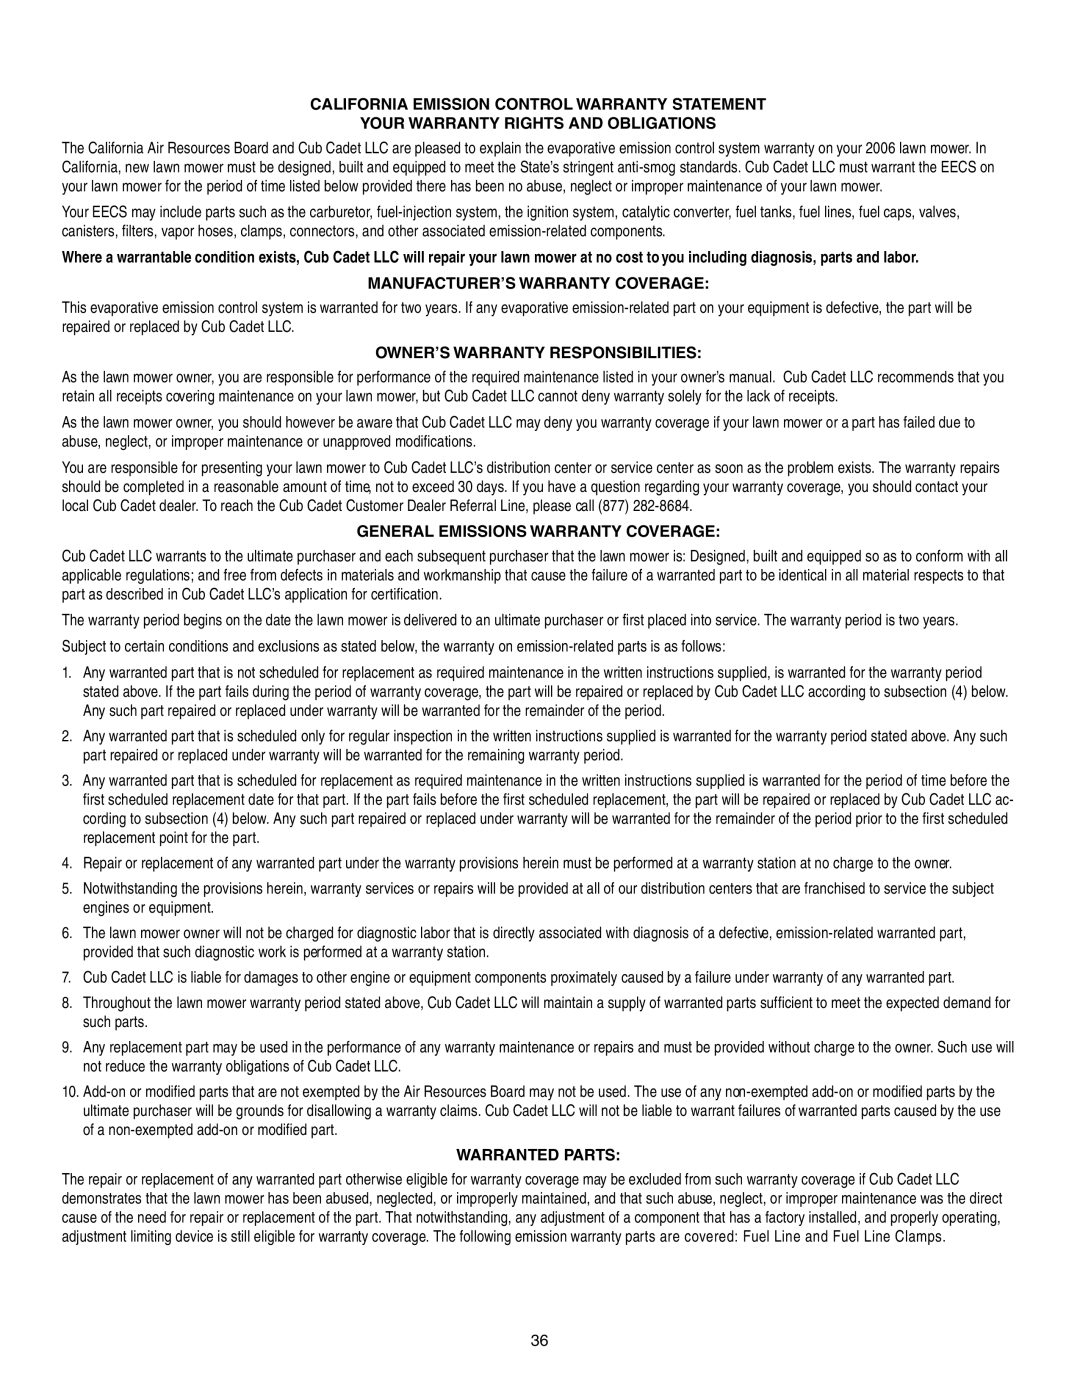 Cub Cadet LT1042 California Emission Control Warranty Statement, Your Warranty Rights And Obligations, Warranted Parts 